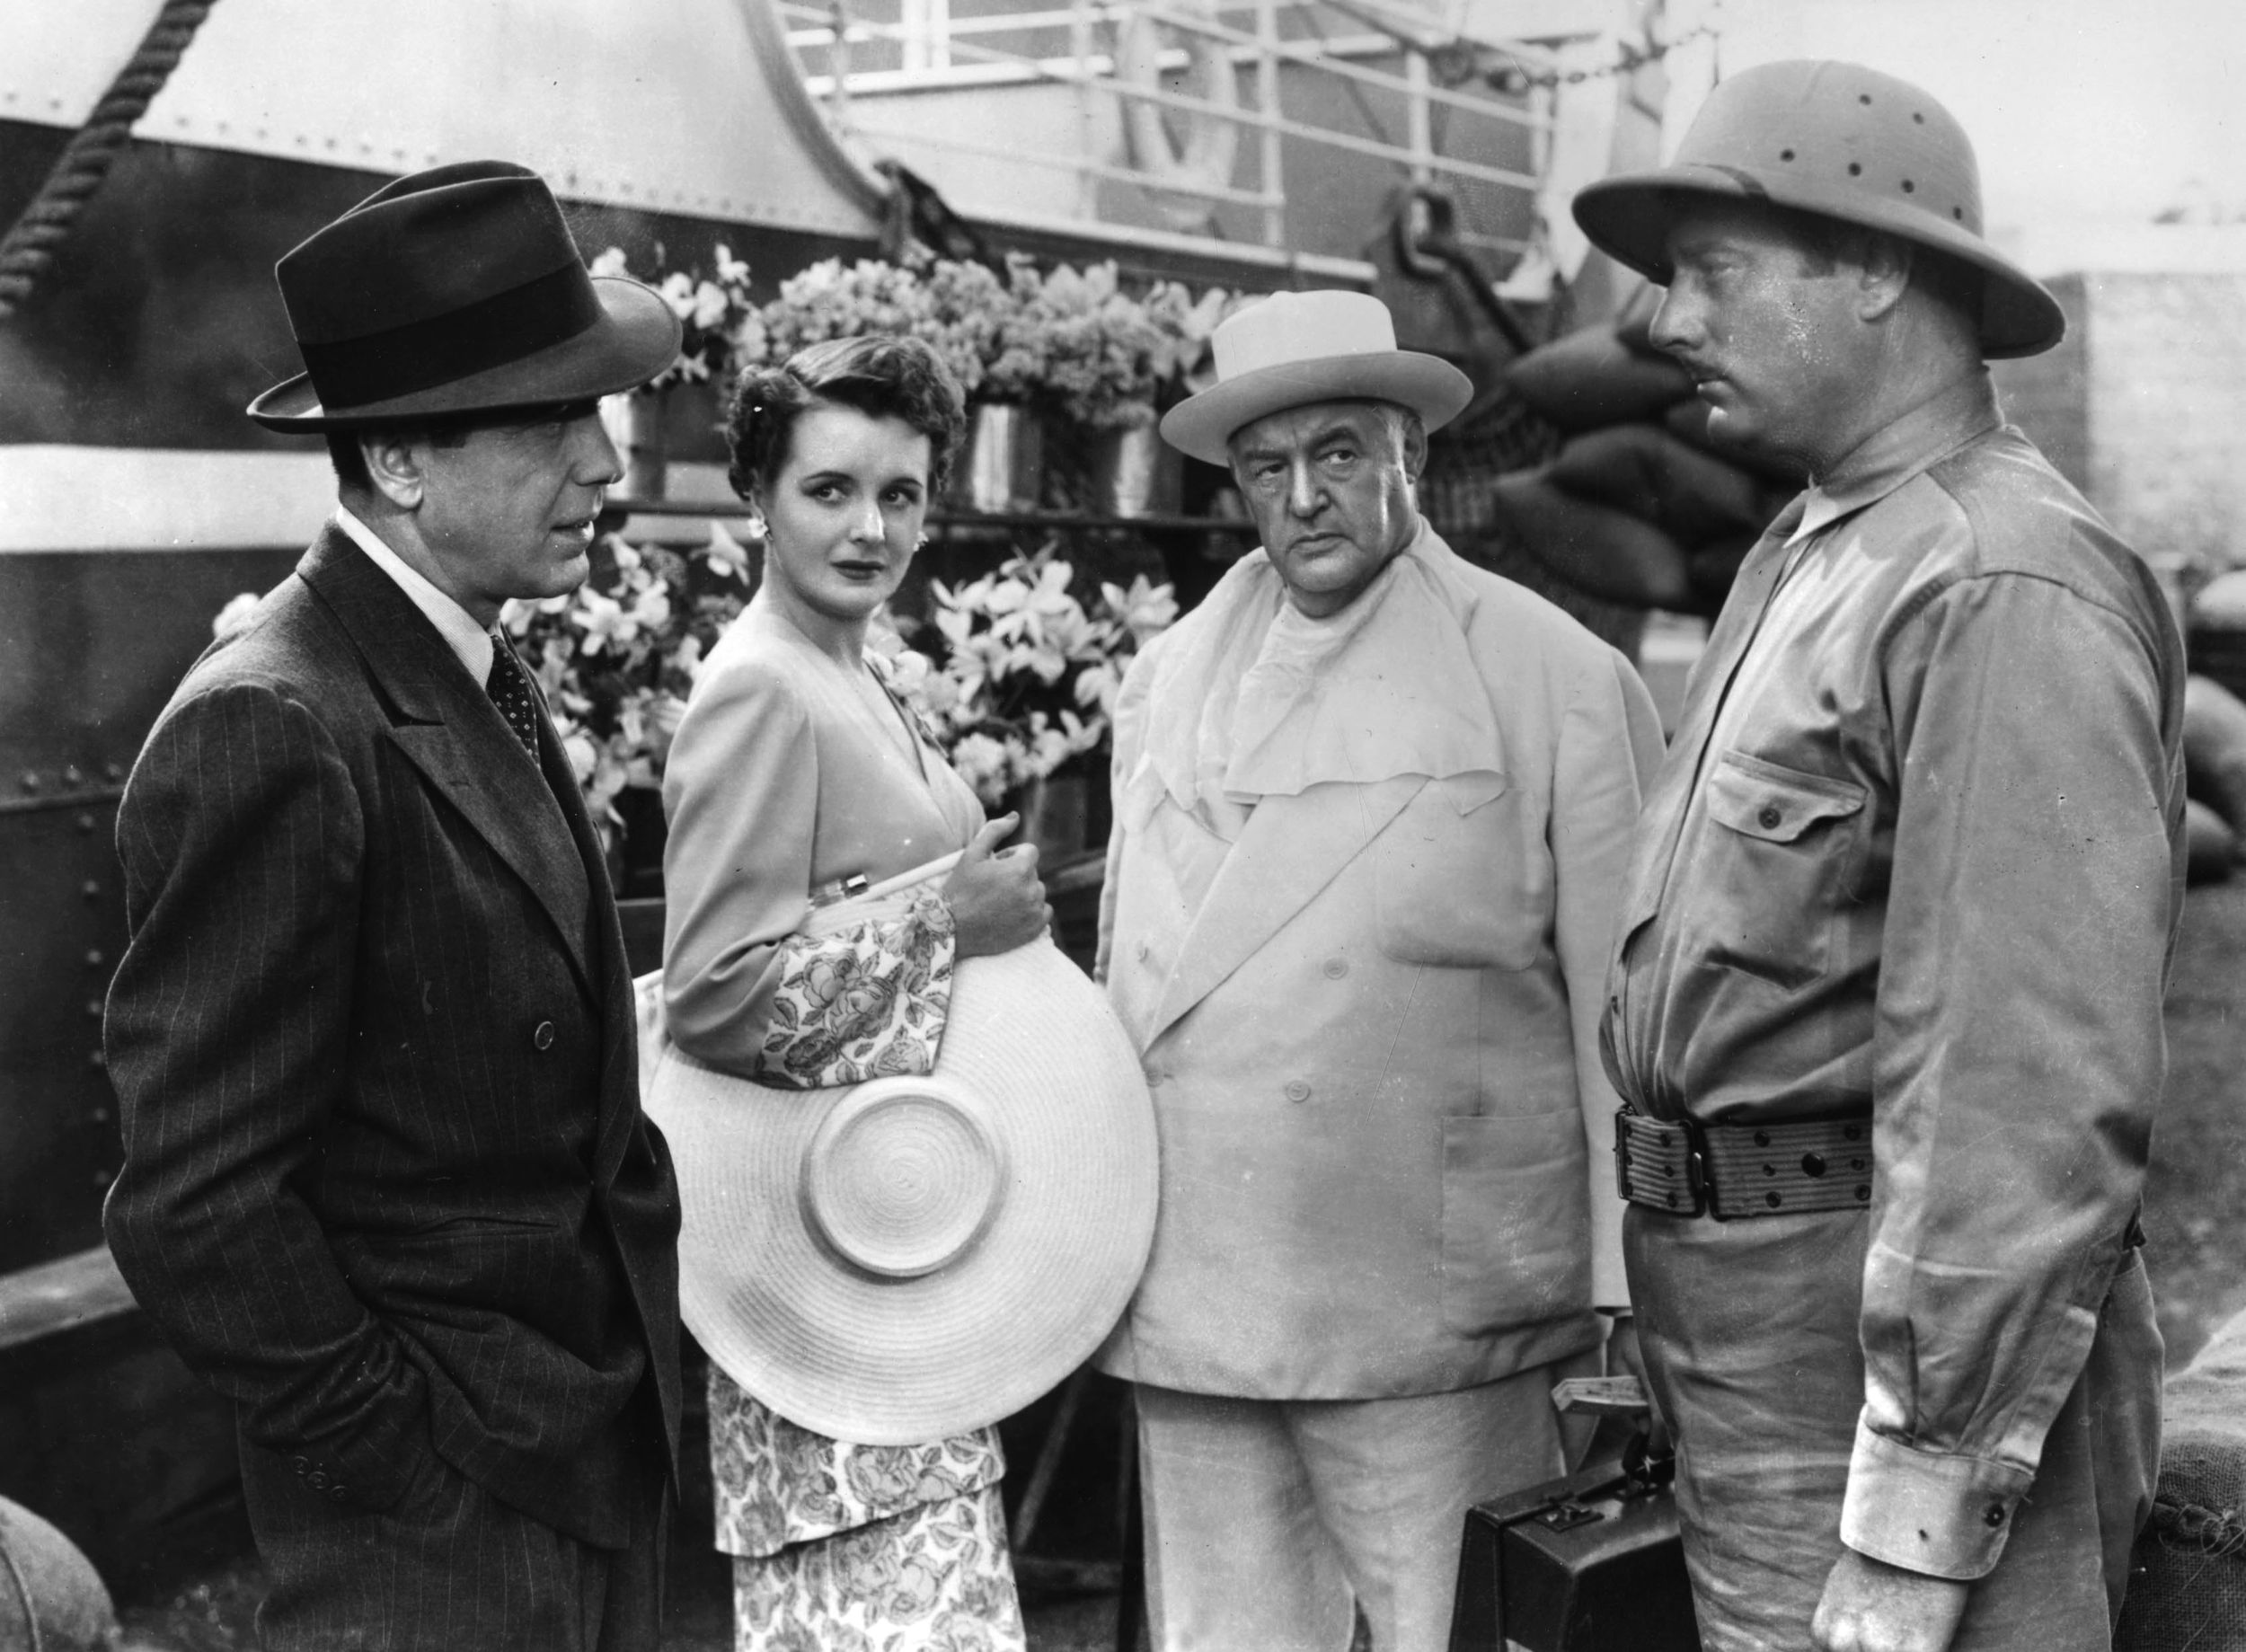 Disgraced Army officer Humphrey Bogart (left) takes on enemy agents, led by Sydney Greenstreet (in white hat), intent on destroying the Panama Canal in Across the Pacific. The 1942 film, directed by John Huston, also stars Mary Astor.